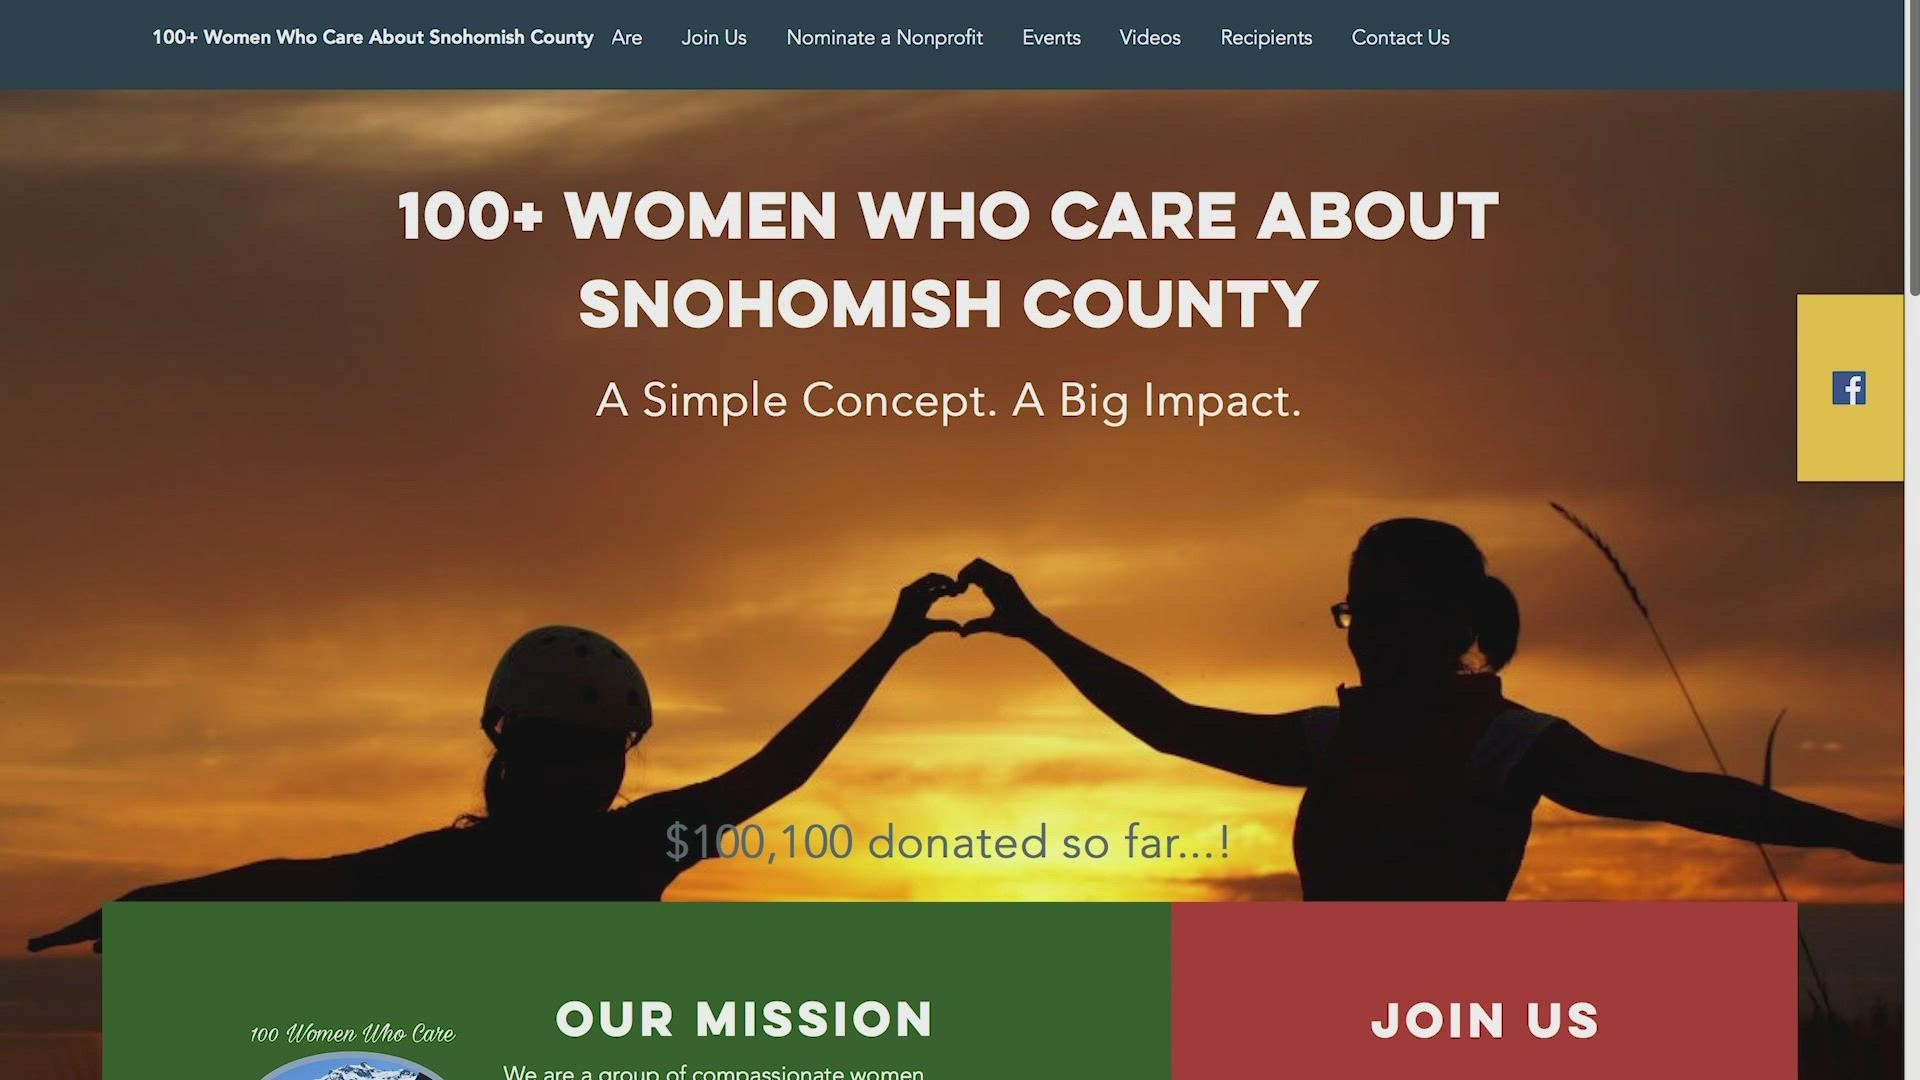 More than 100 women in Snohomish County are uniting to give something back to their community.